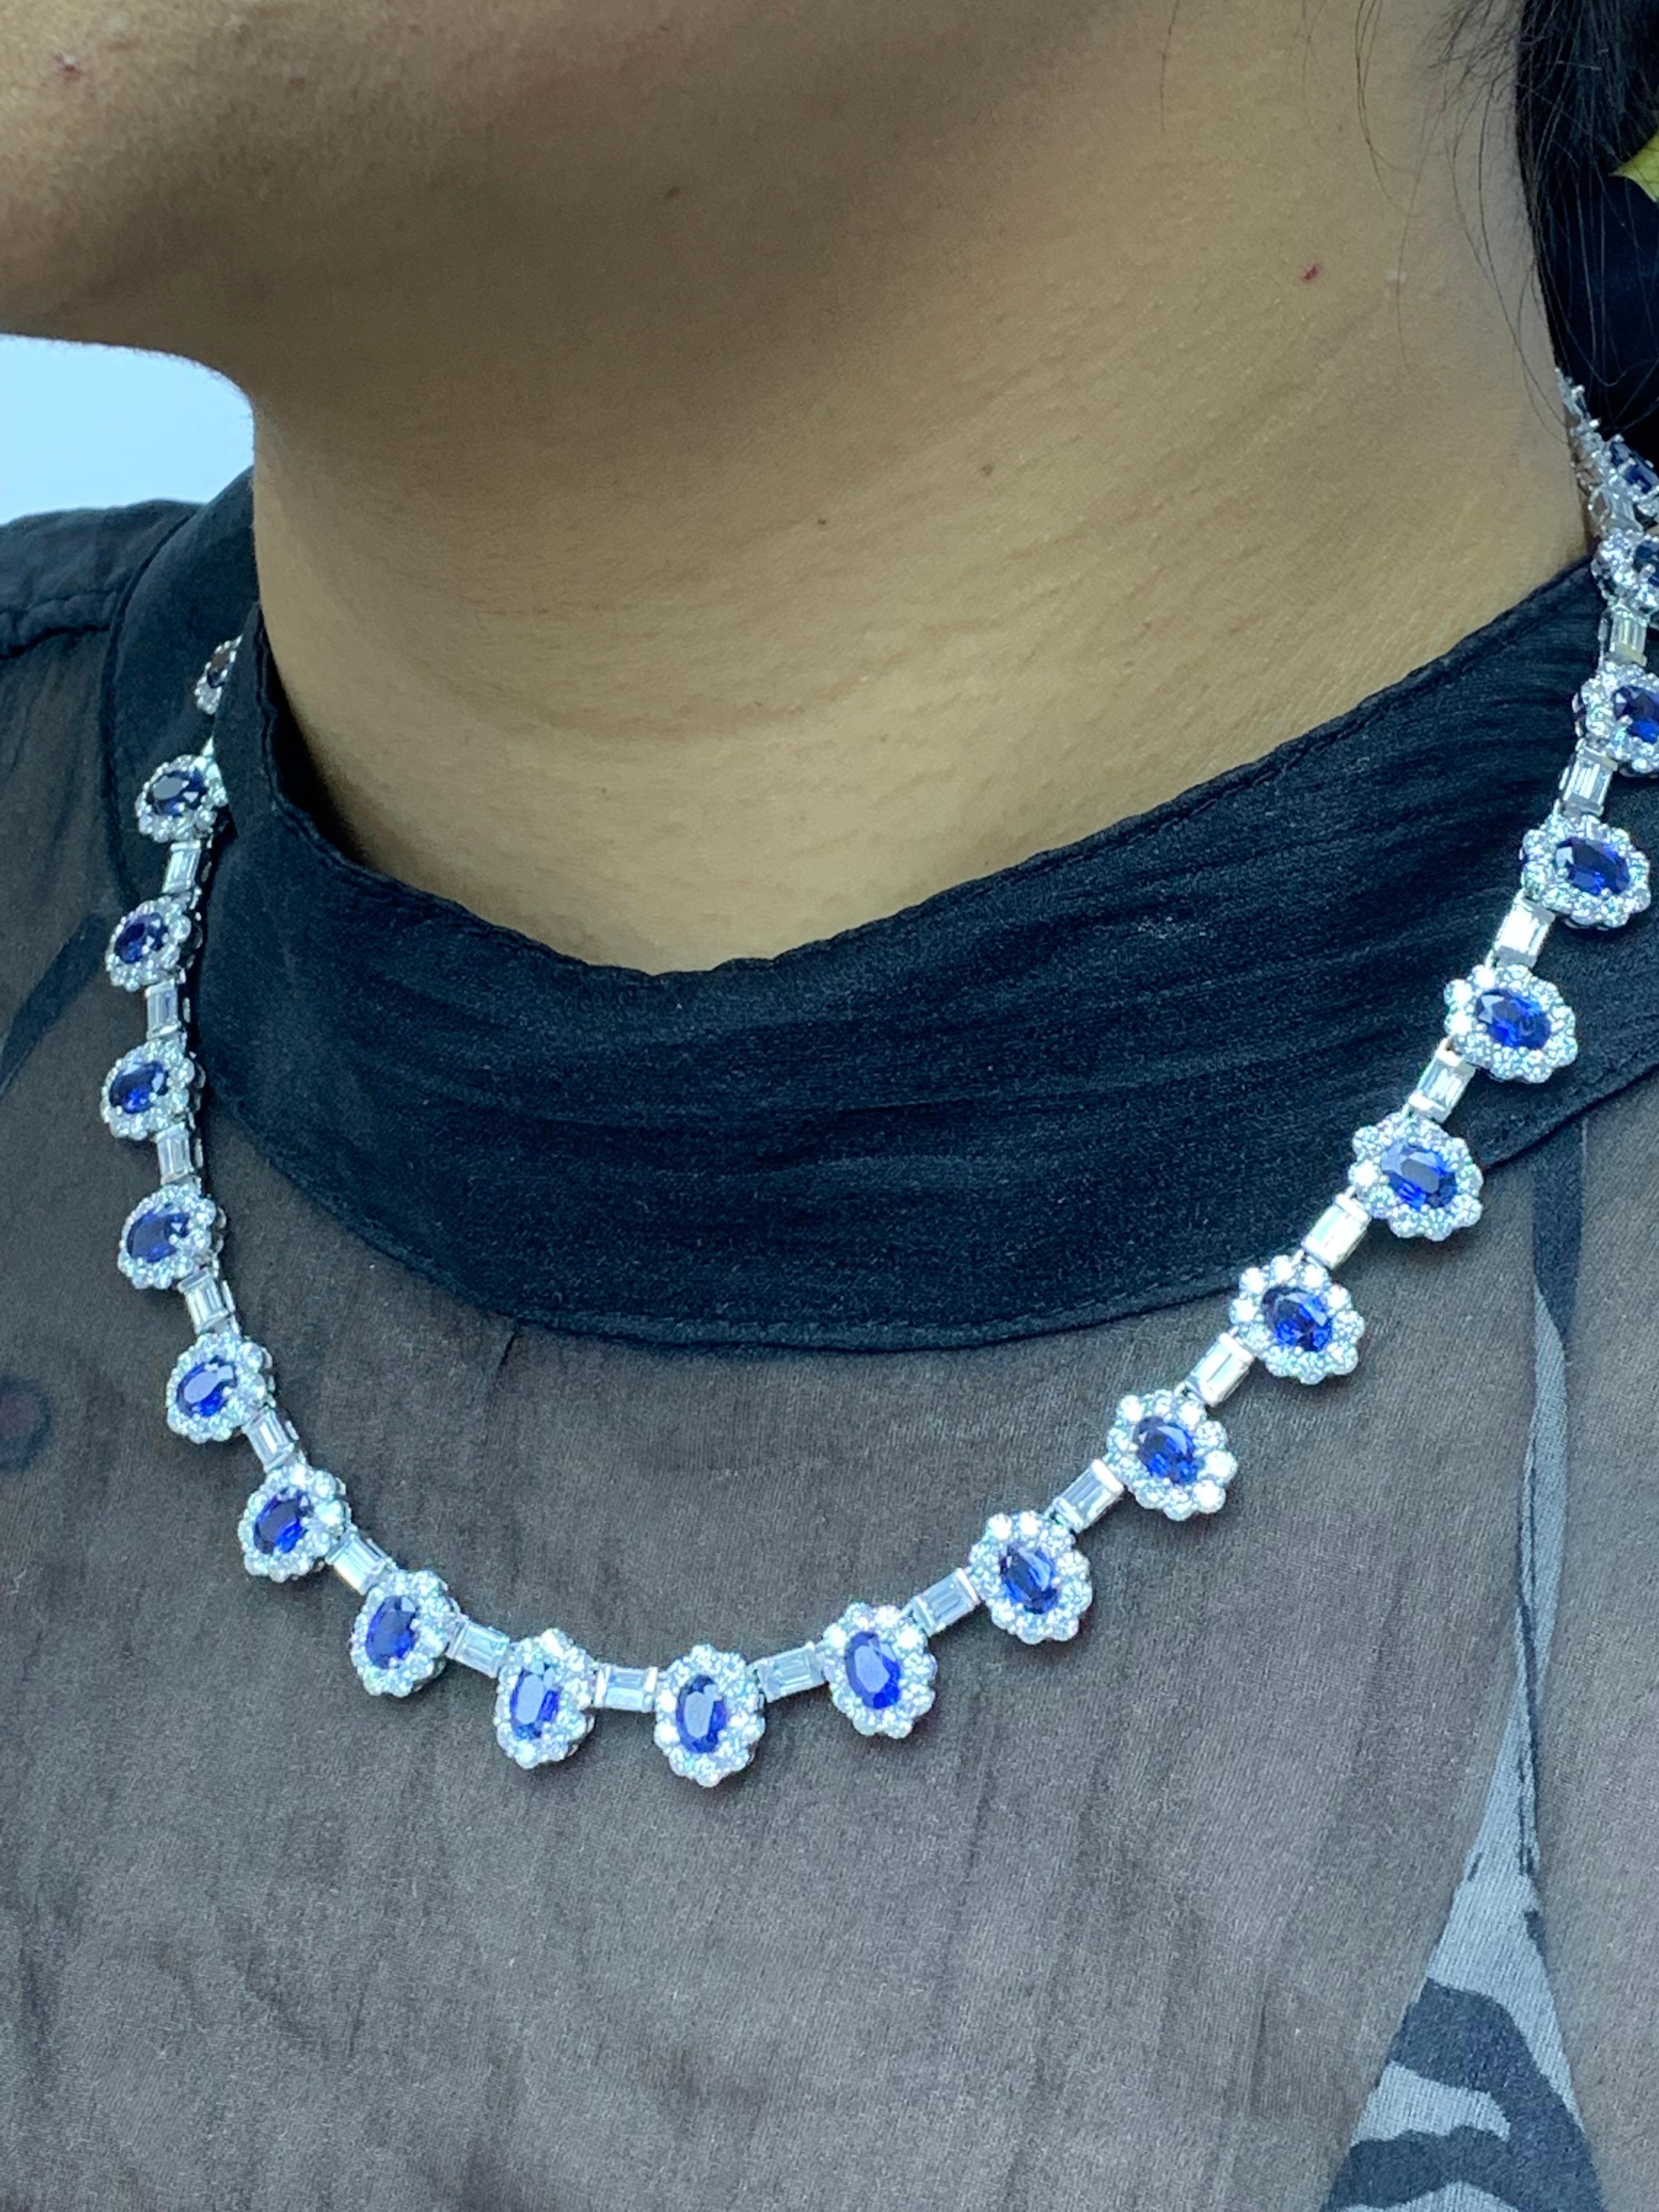 12.74 Carat Oval Cut Blue Sapphire and Diamond Necklace in 18K White Gold For Sale 1